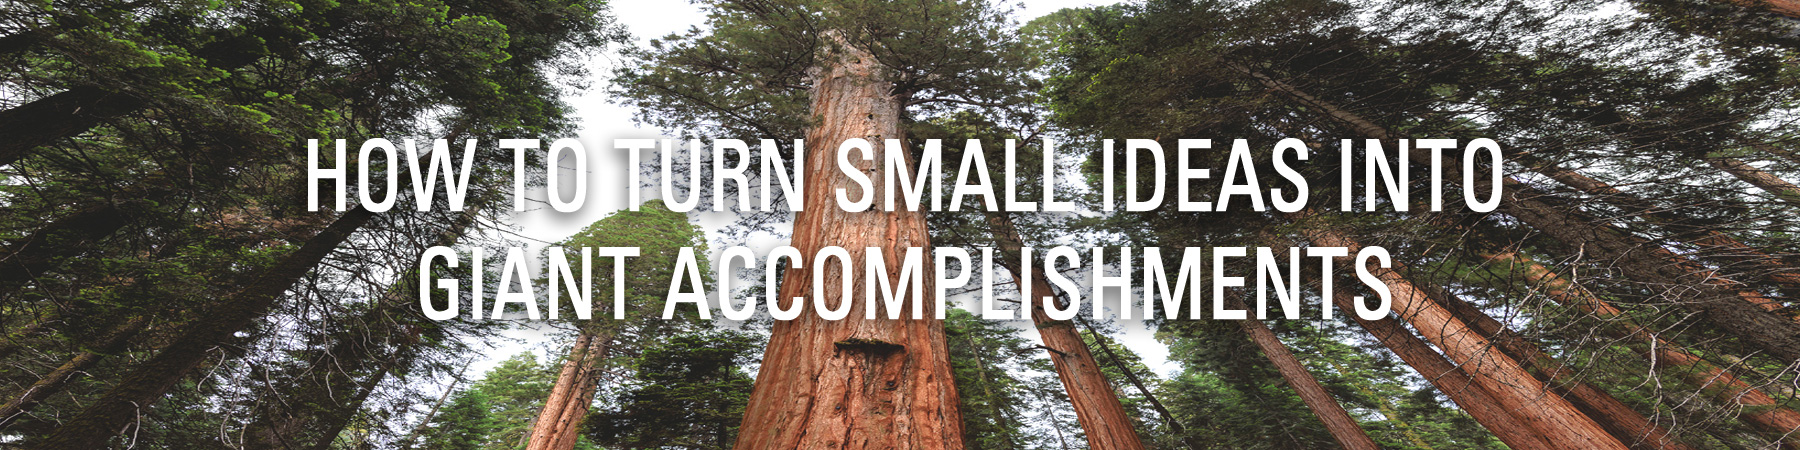 How to Turn Small Ideas Into Giant Accomplishments